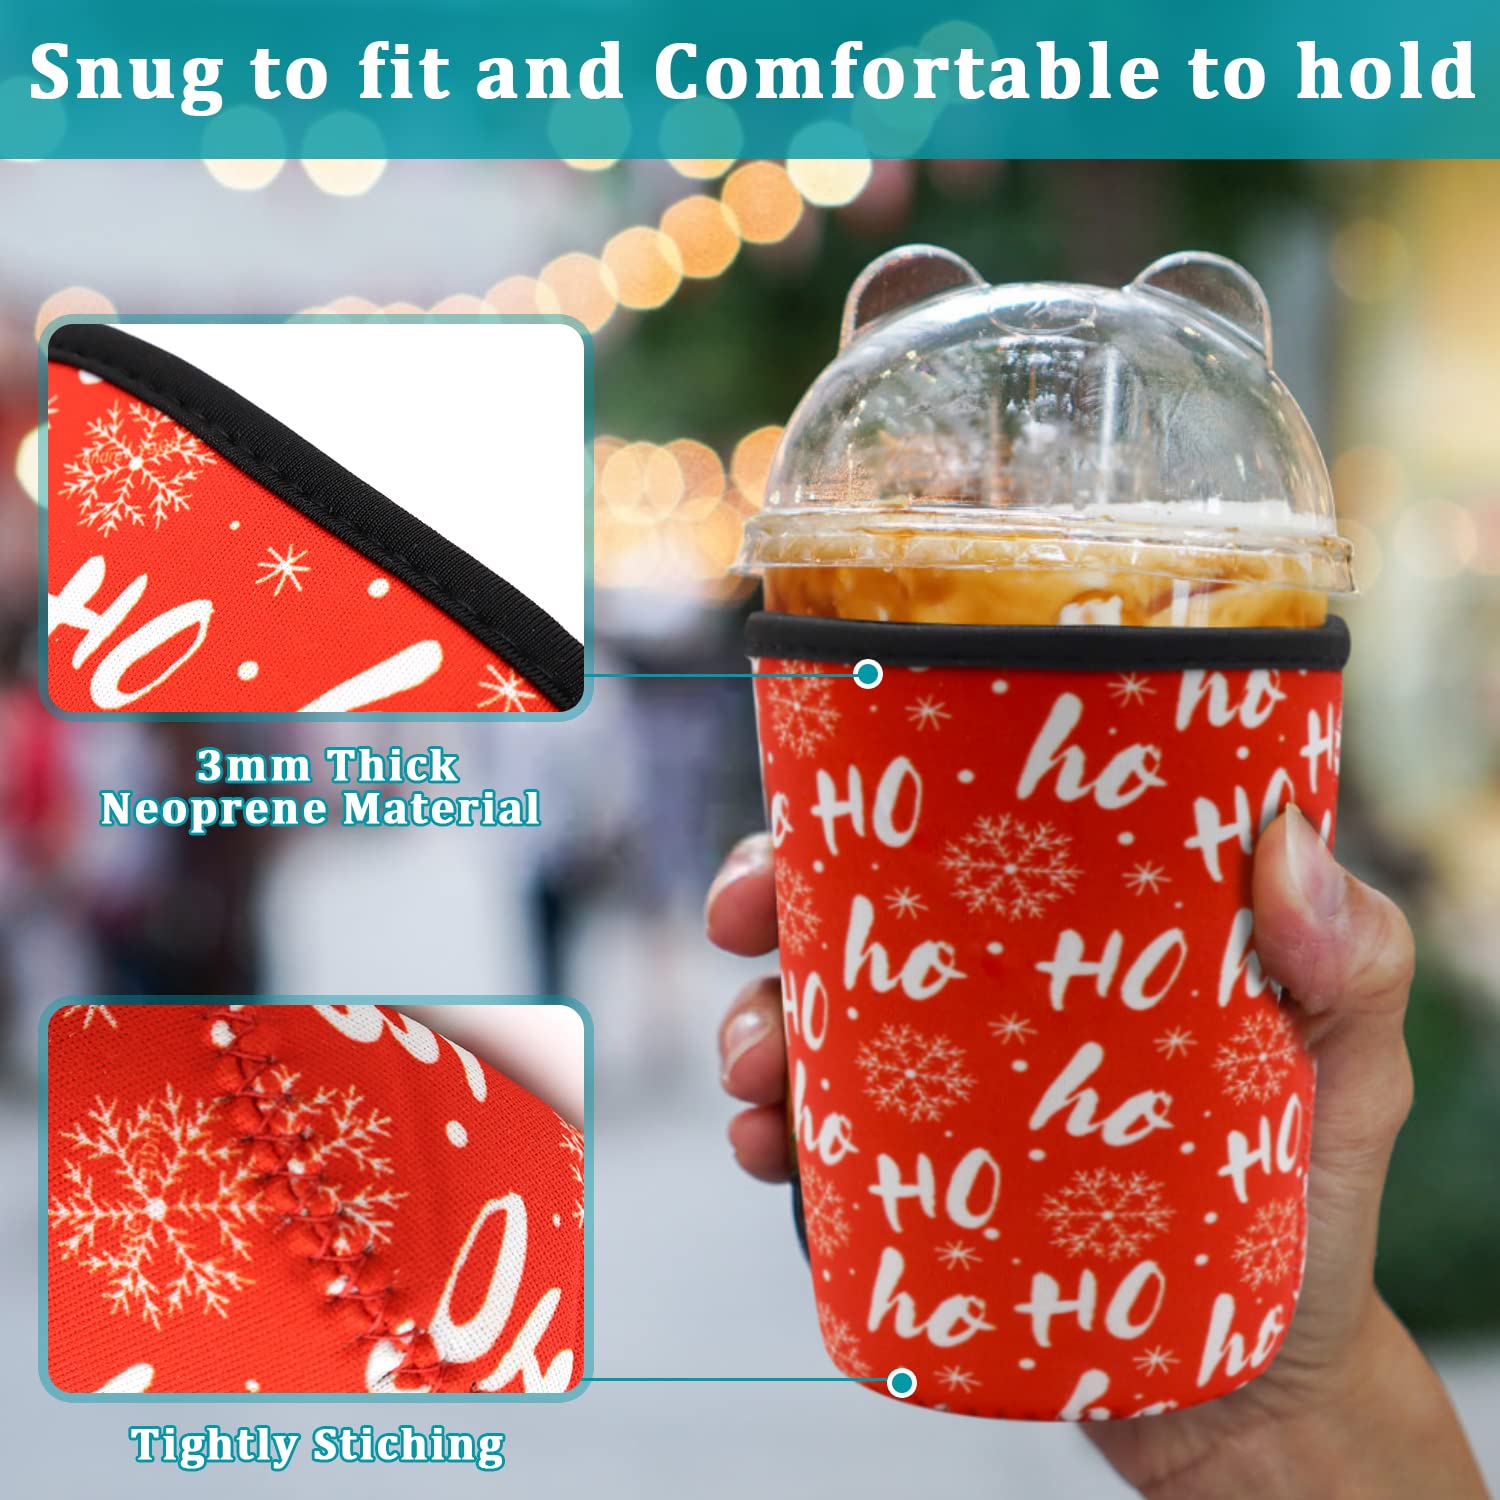 Reusable Iced Coffee Sleeve for Cold Drink Cups, Neoprene Insulator Cup Cover Holder Compatible with Starbucks Dunkin McDonalds Coffee - 3mm Thick (Large Size 30-32oz,Christmas hats style)